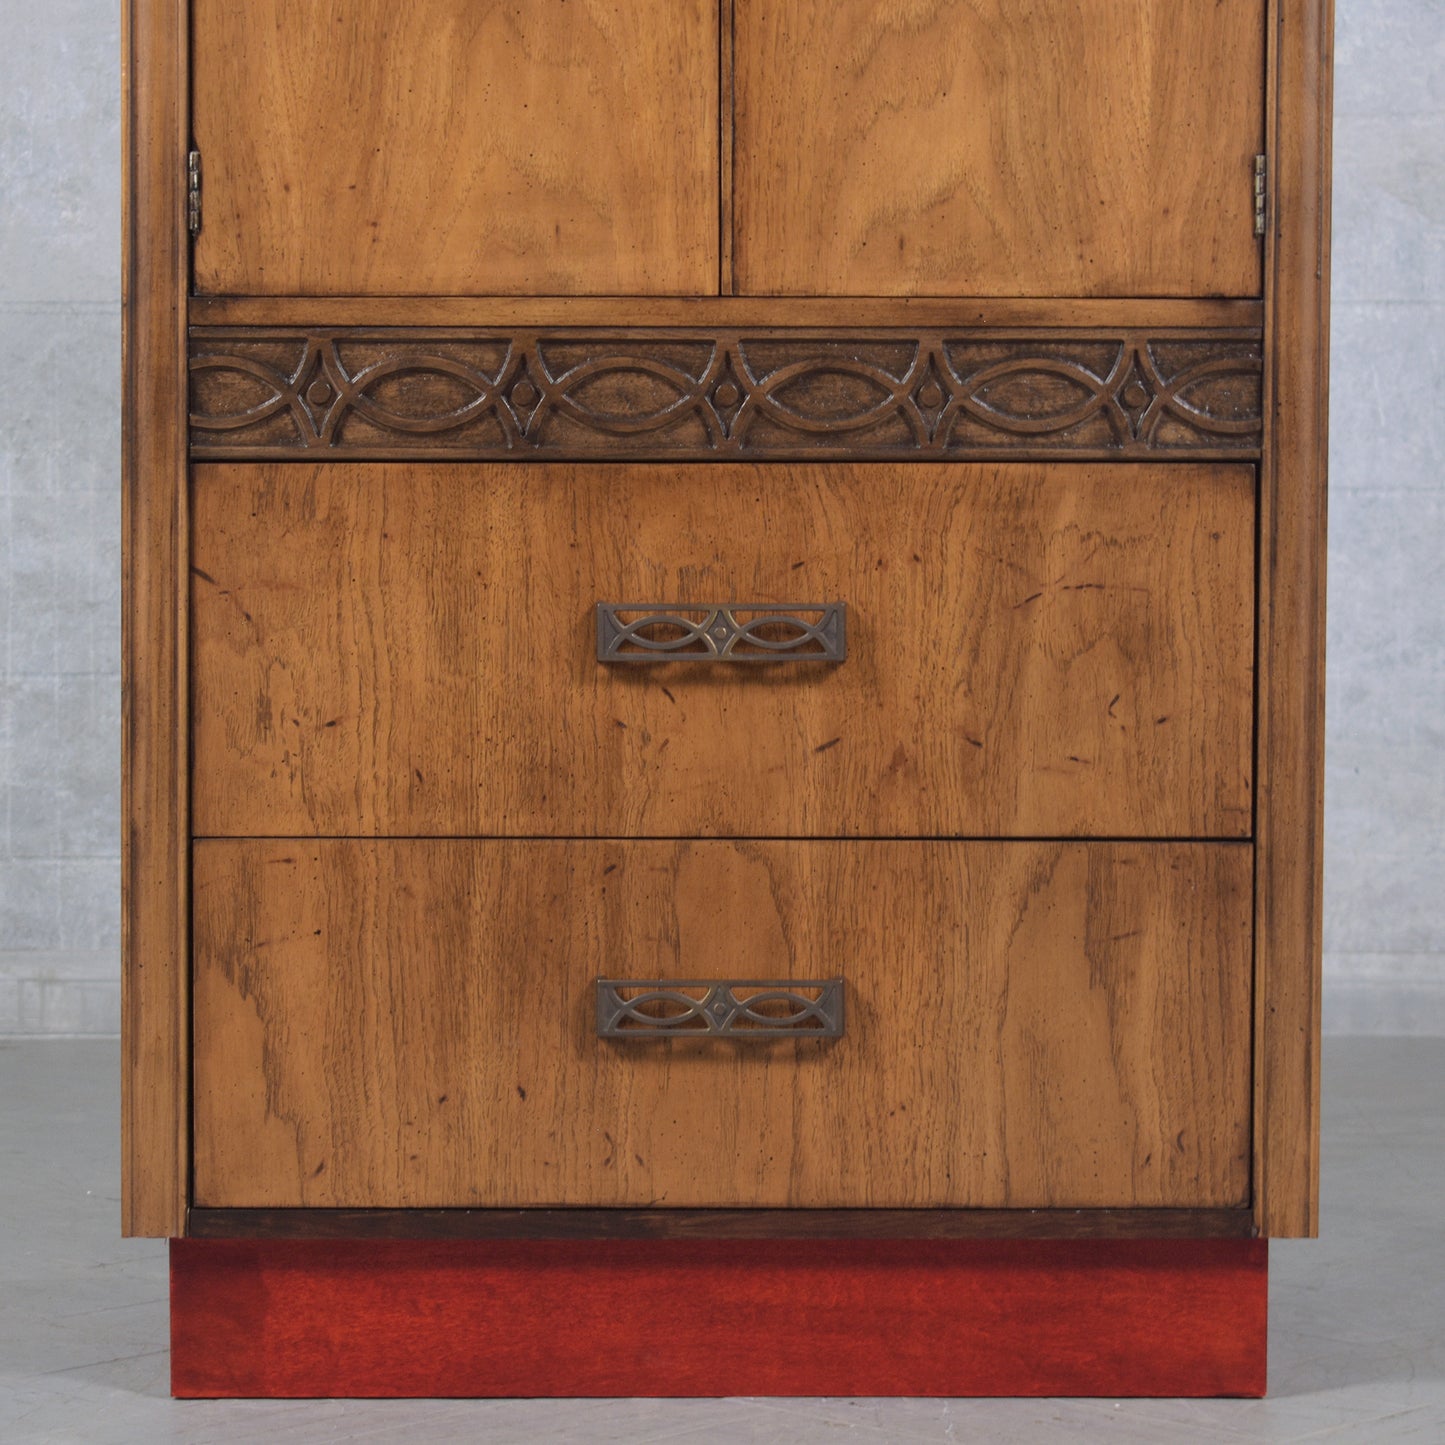 Stunning 1960s Mid-Century Modern Walnut Bachelor Chest with Sculpted Details